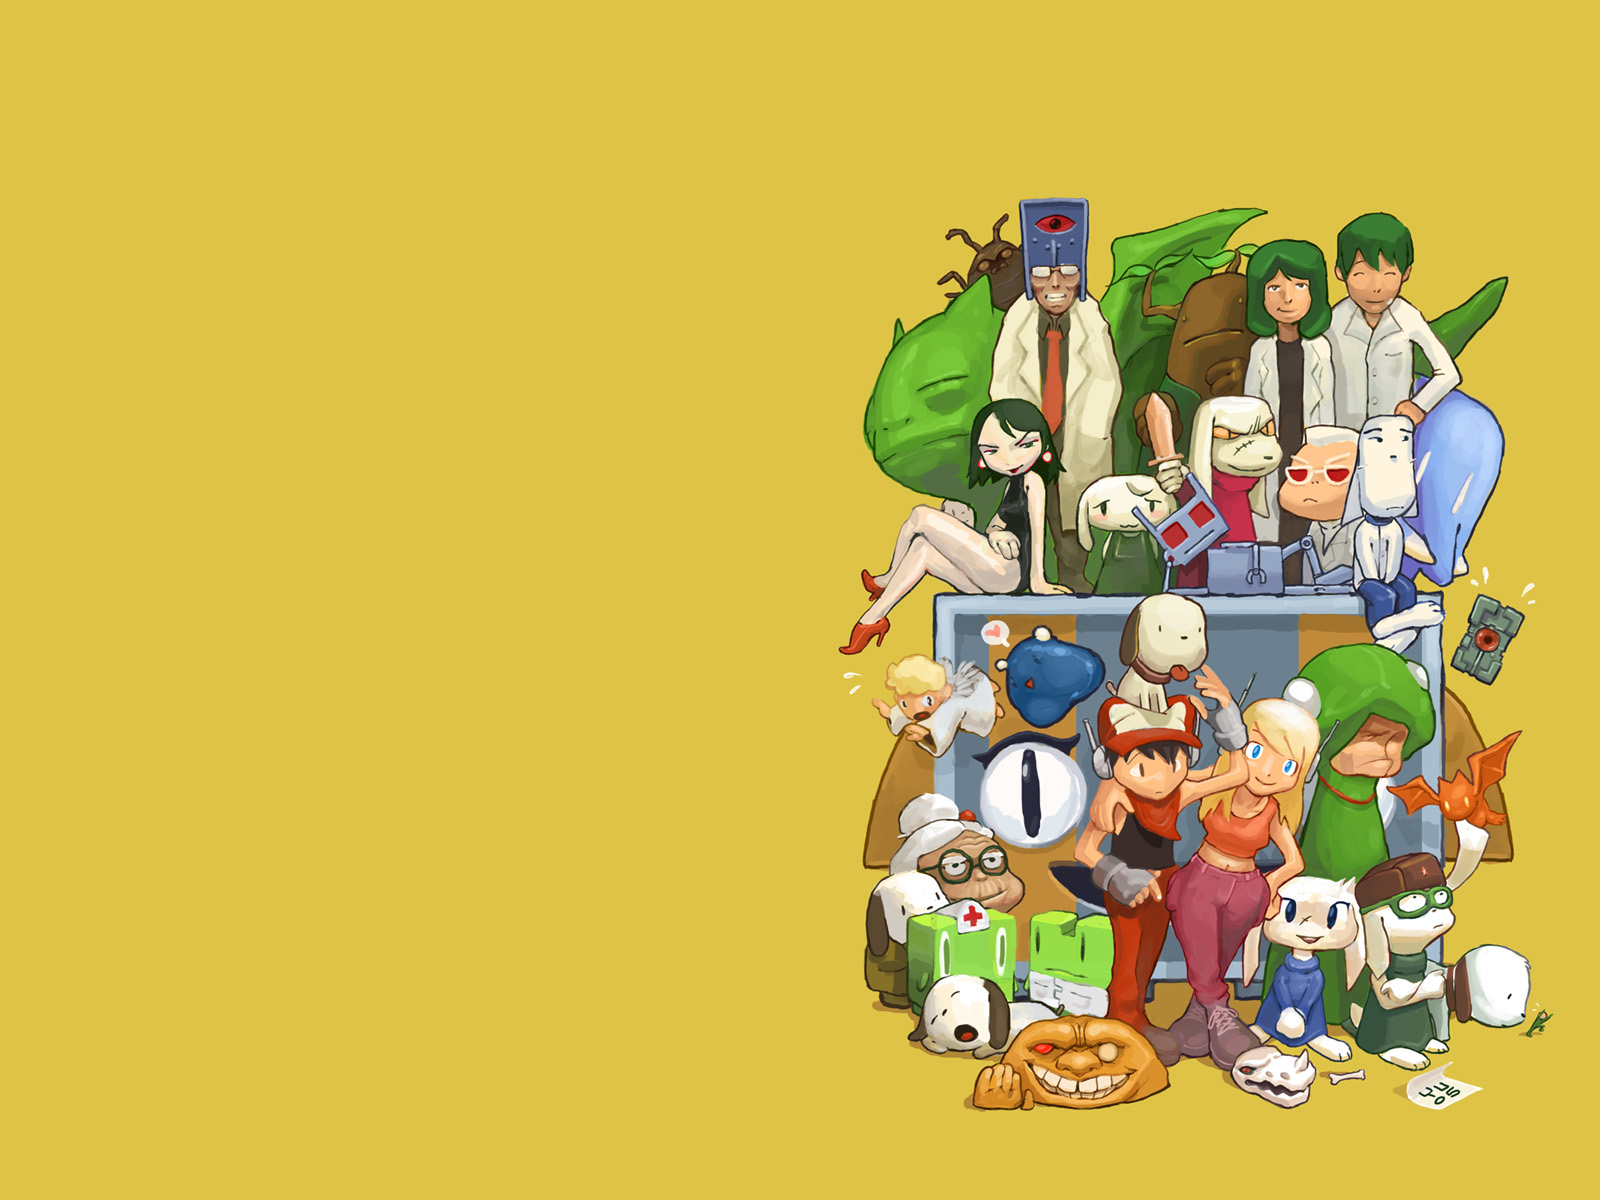 Video Game Cave Story HD Wallpaper | Background Image